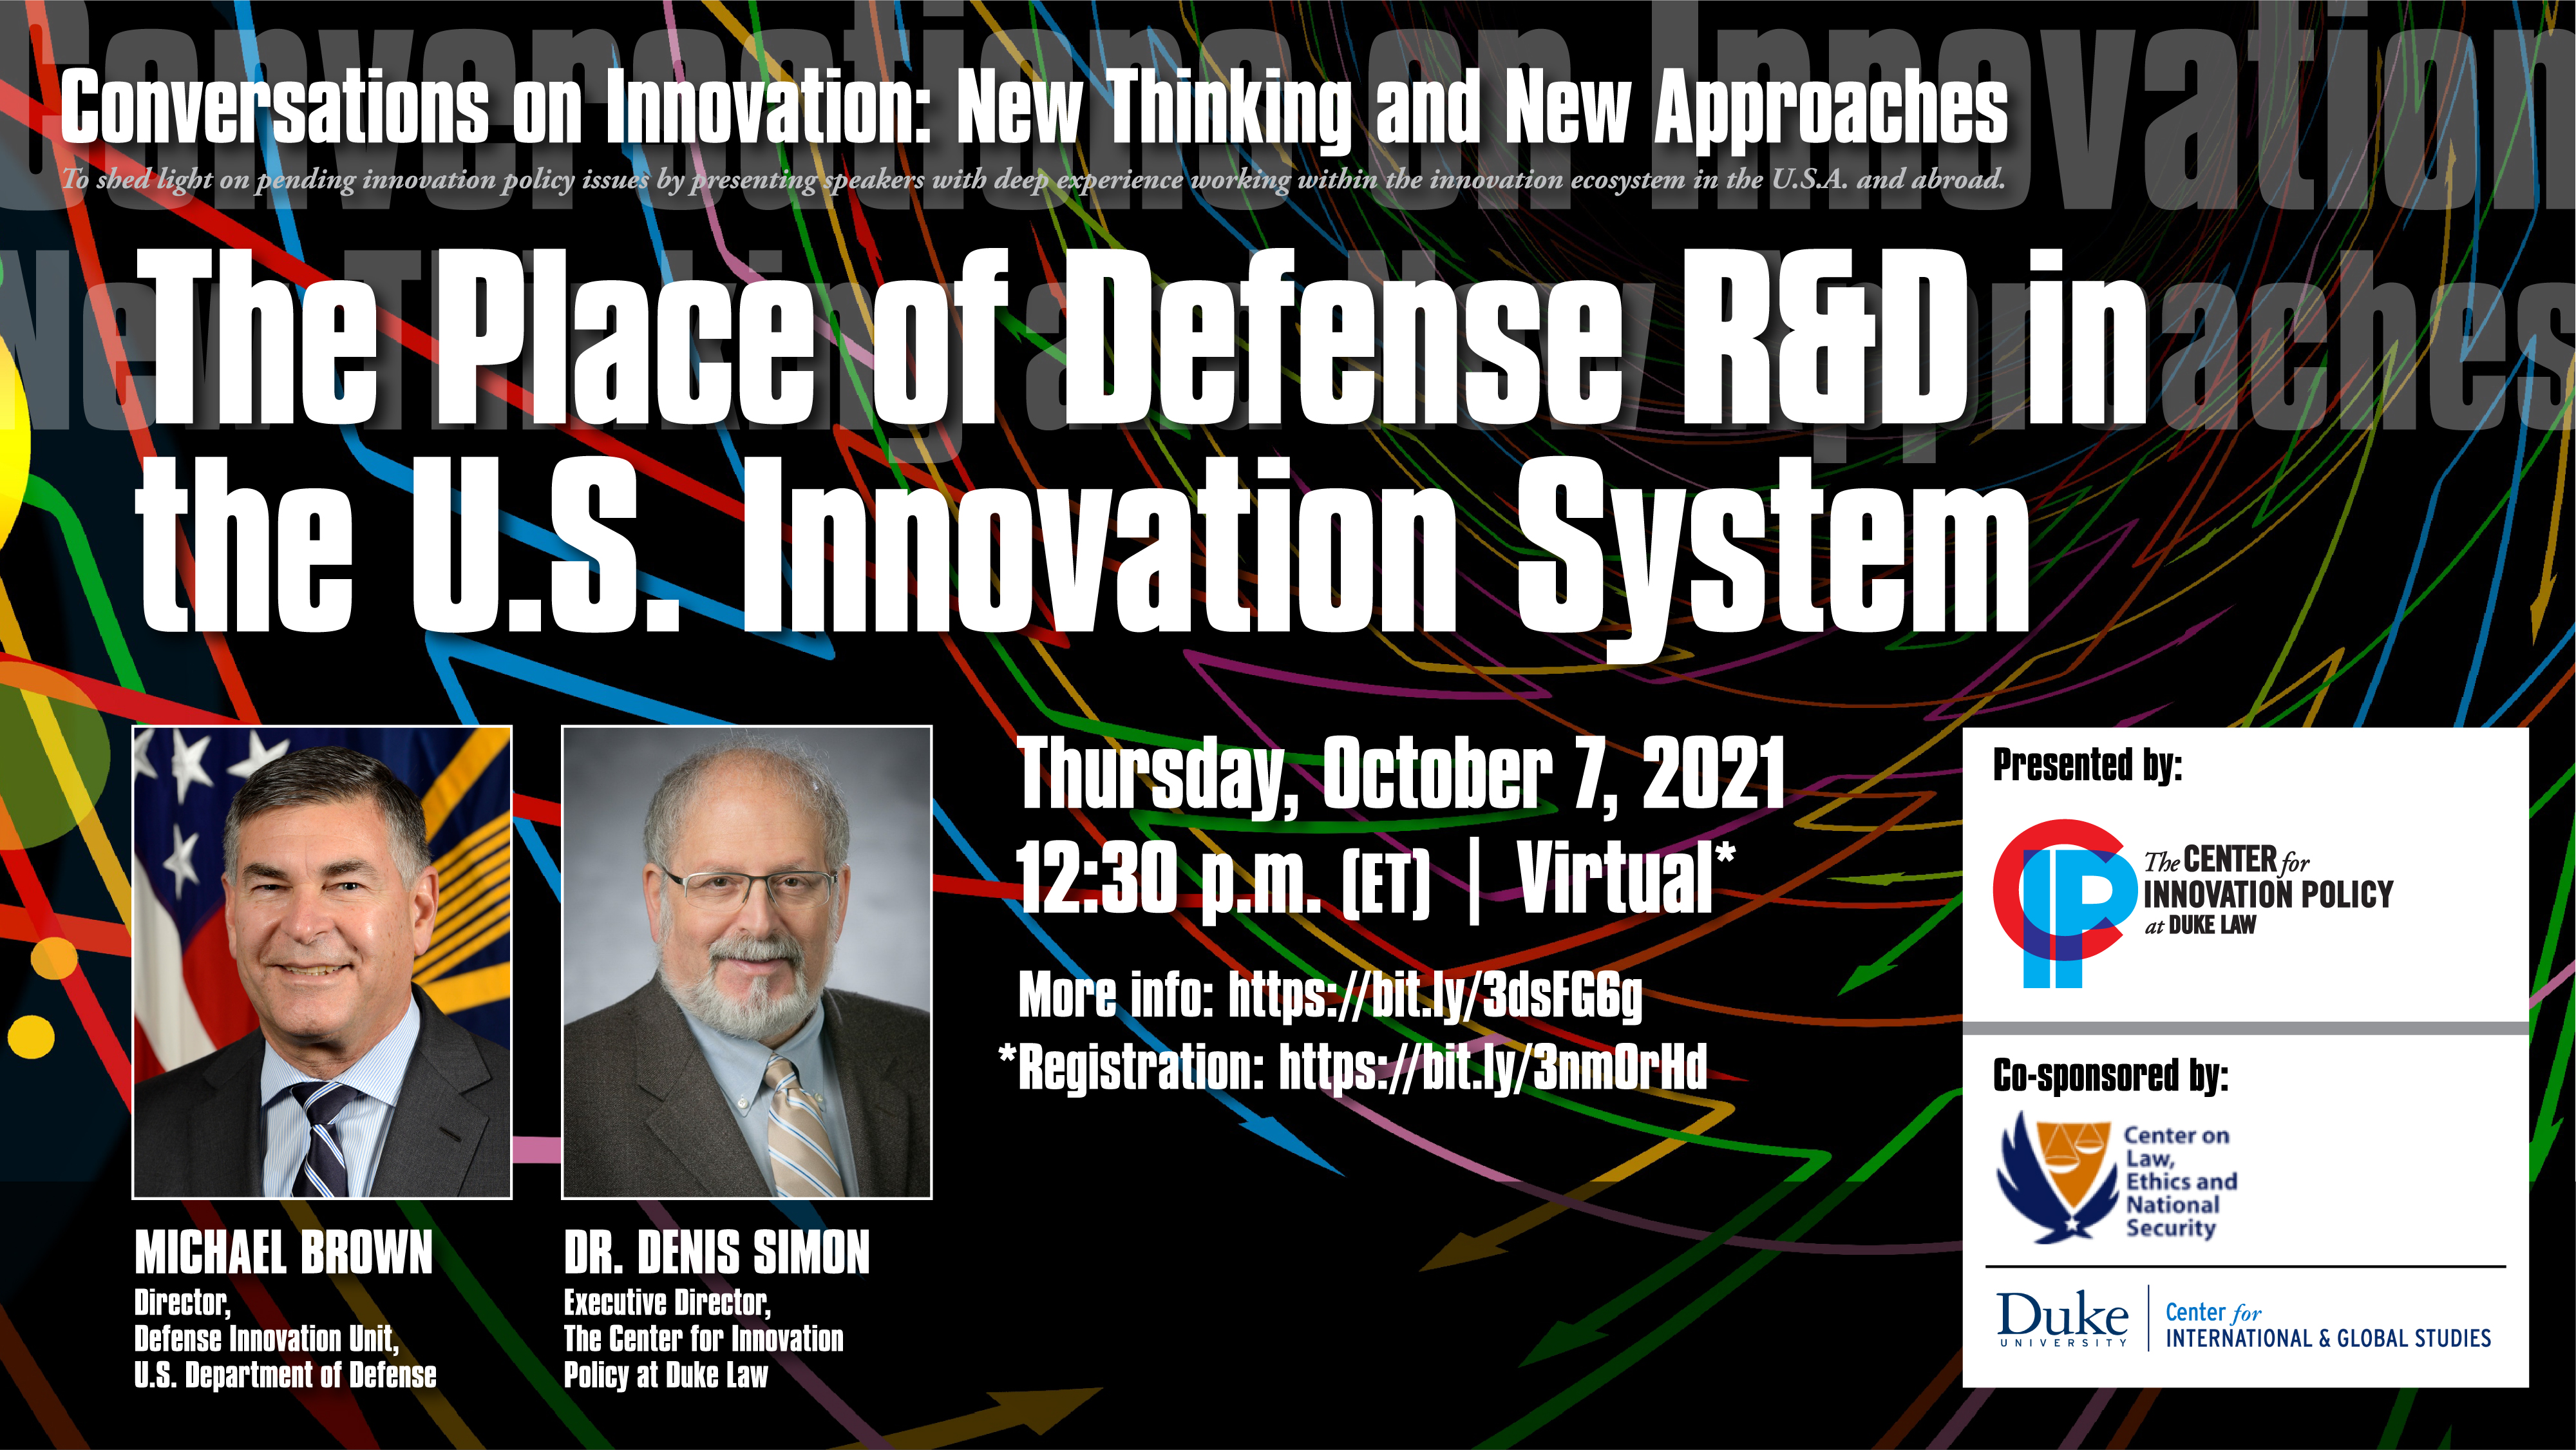 The Place of Defense R&D in the U.S. Innovation System poster